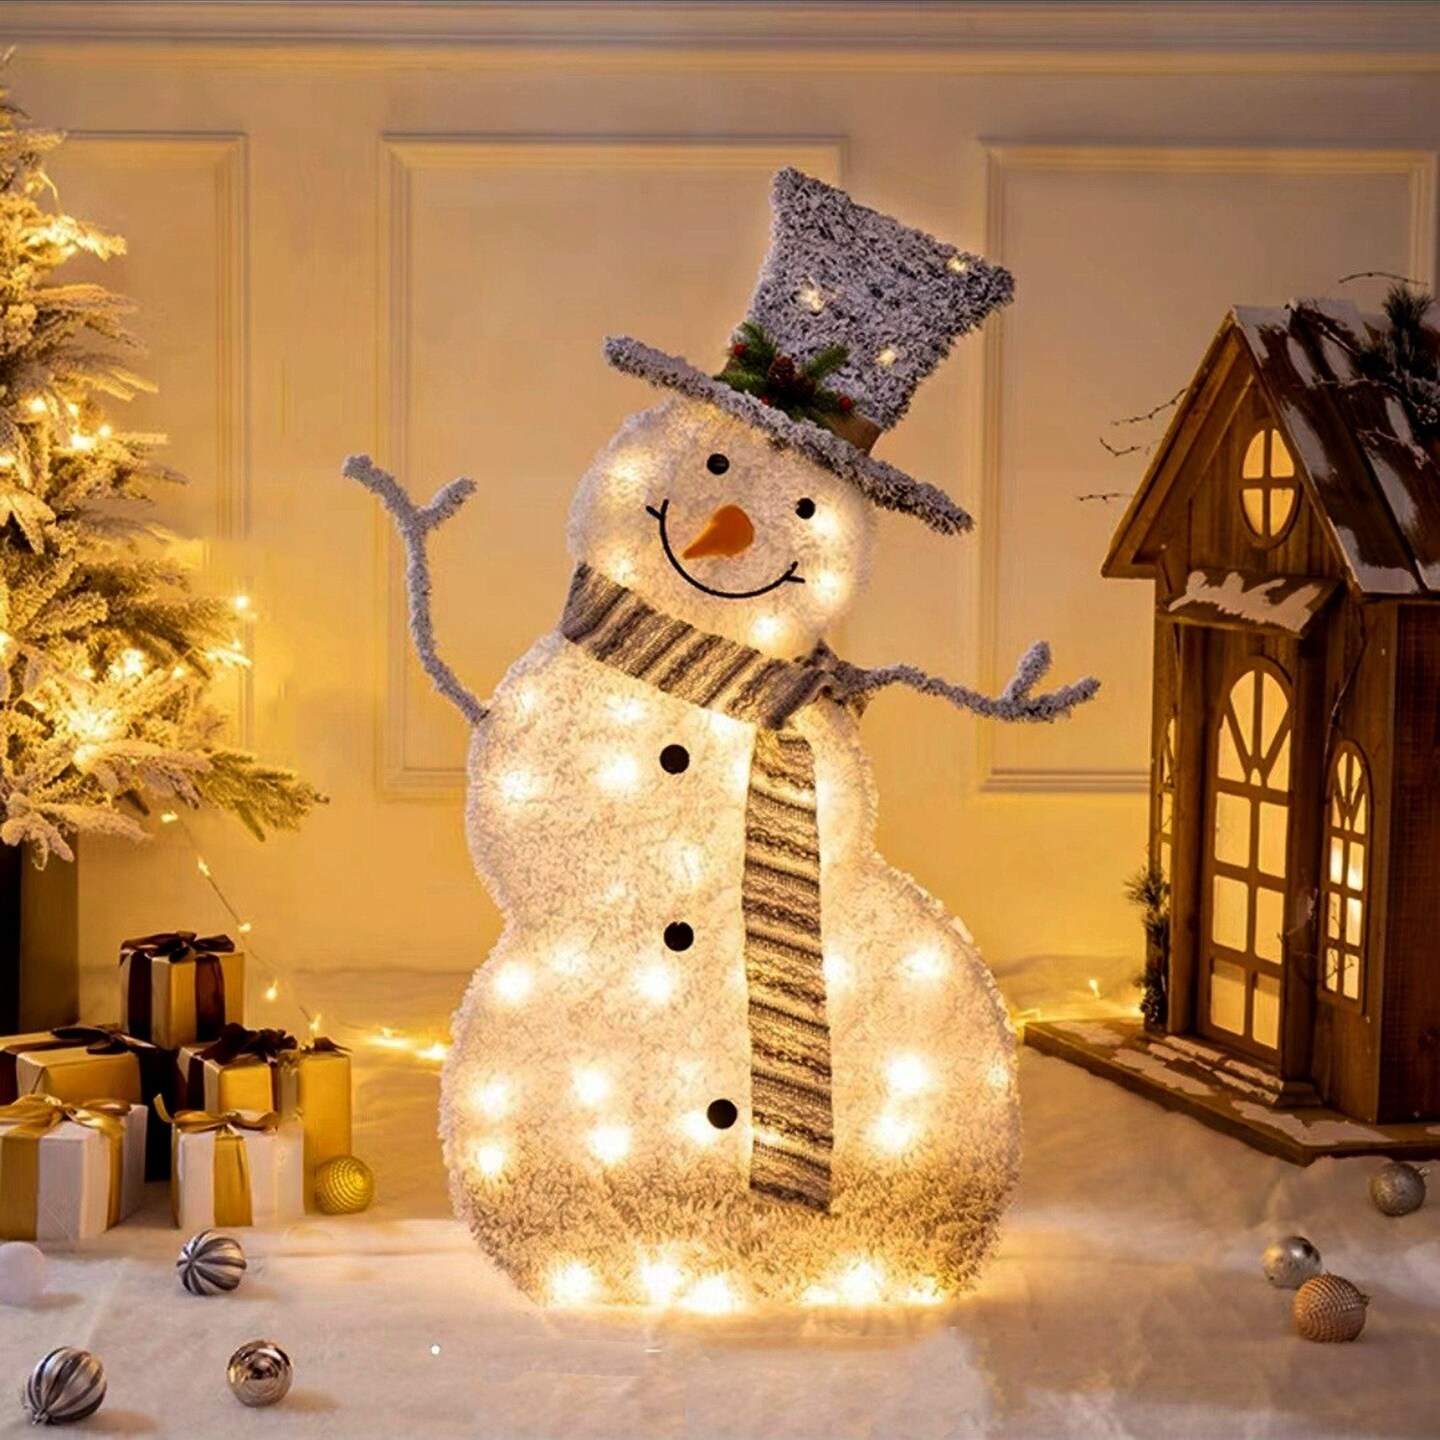 Global Phoenix LED Christmas Snowman Decoration Light Collapsible Battery Operated Lighted Snowman